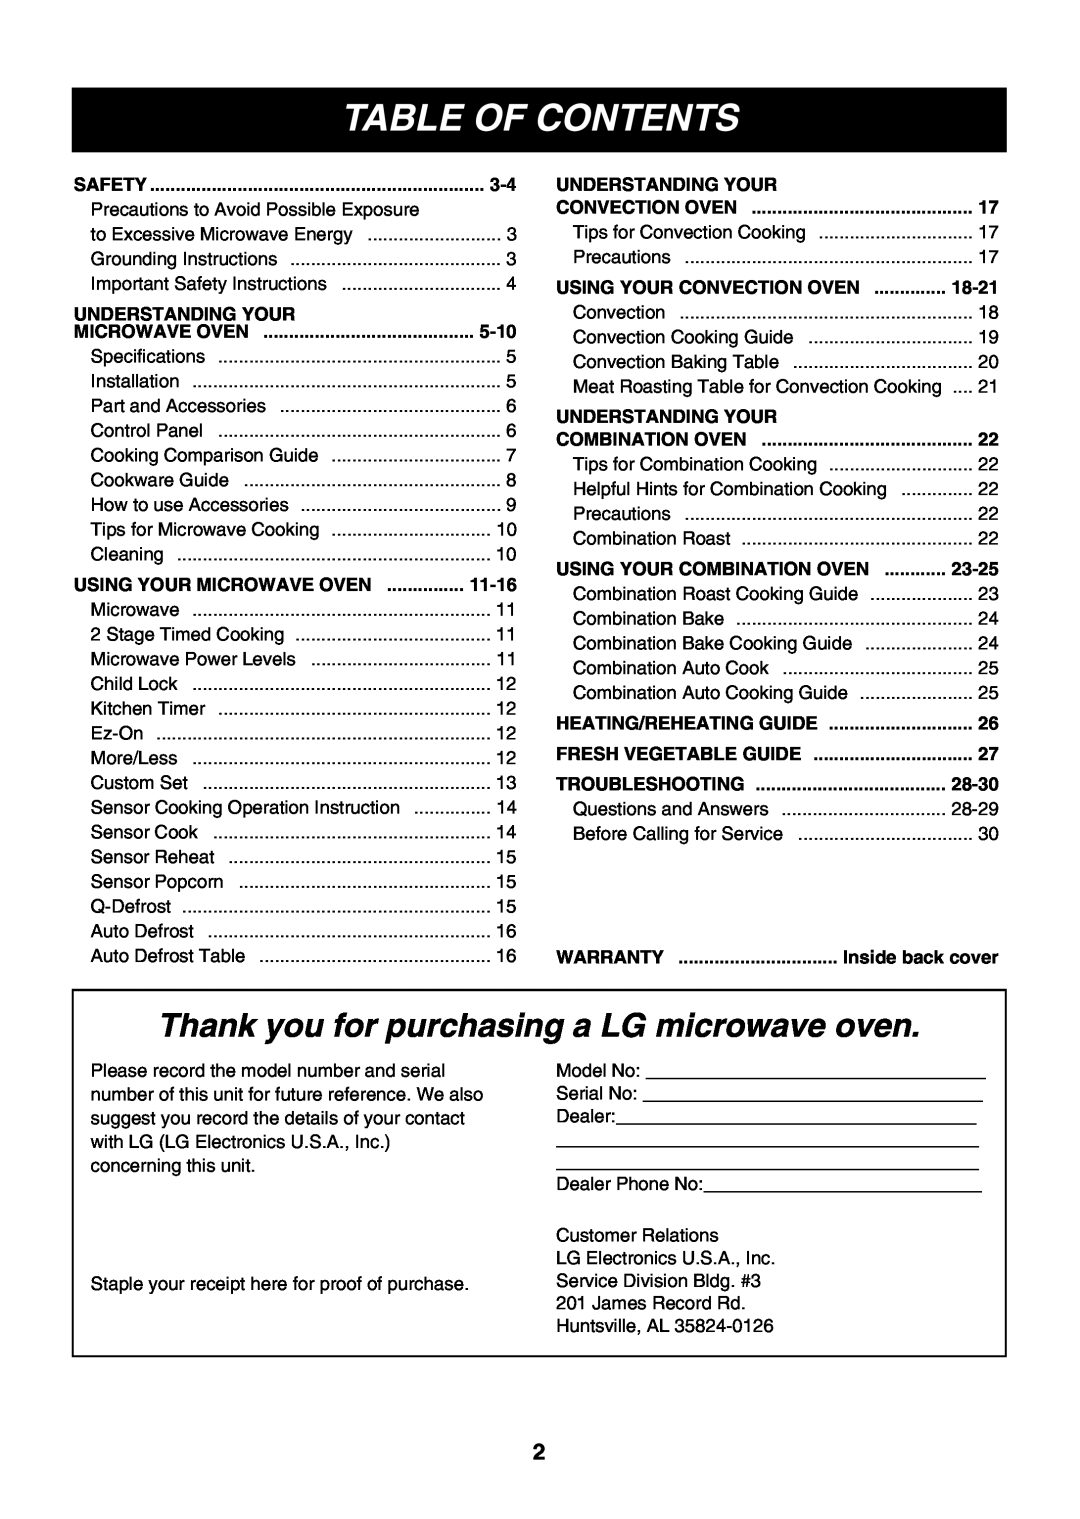 LG Electronics LMH1017CVW Table Of Contents, Safety, Understanding Your, 5-10, Using Your Microwave Oven, Warranty 